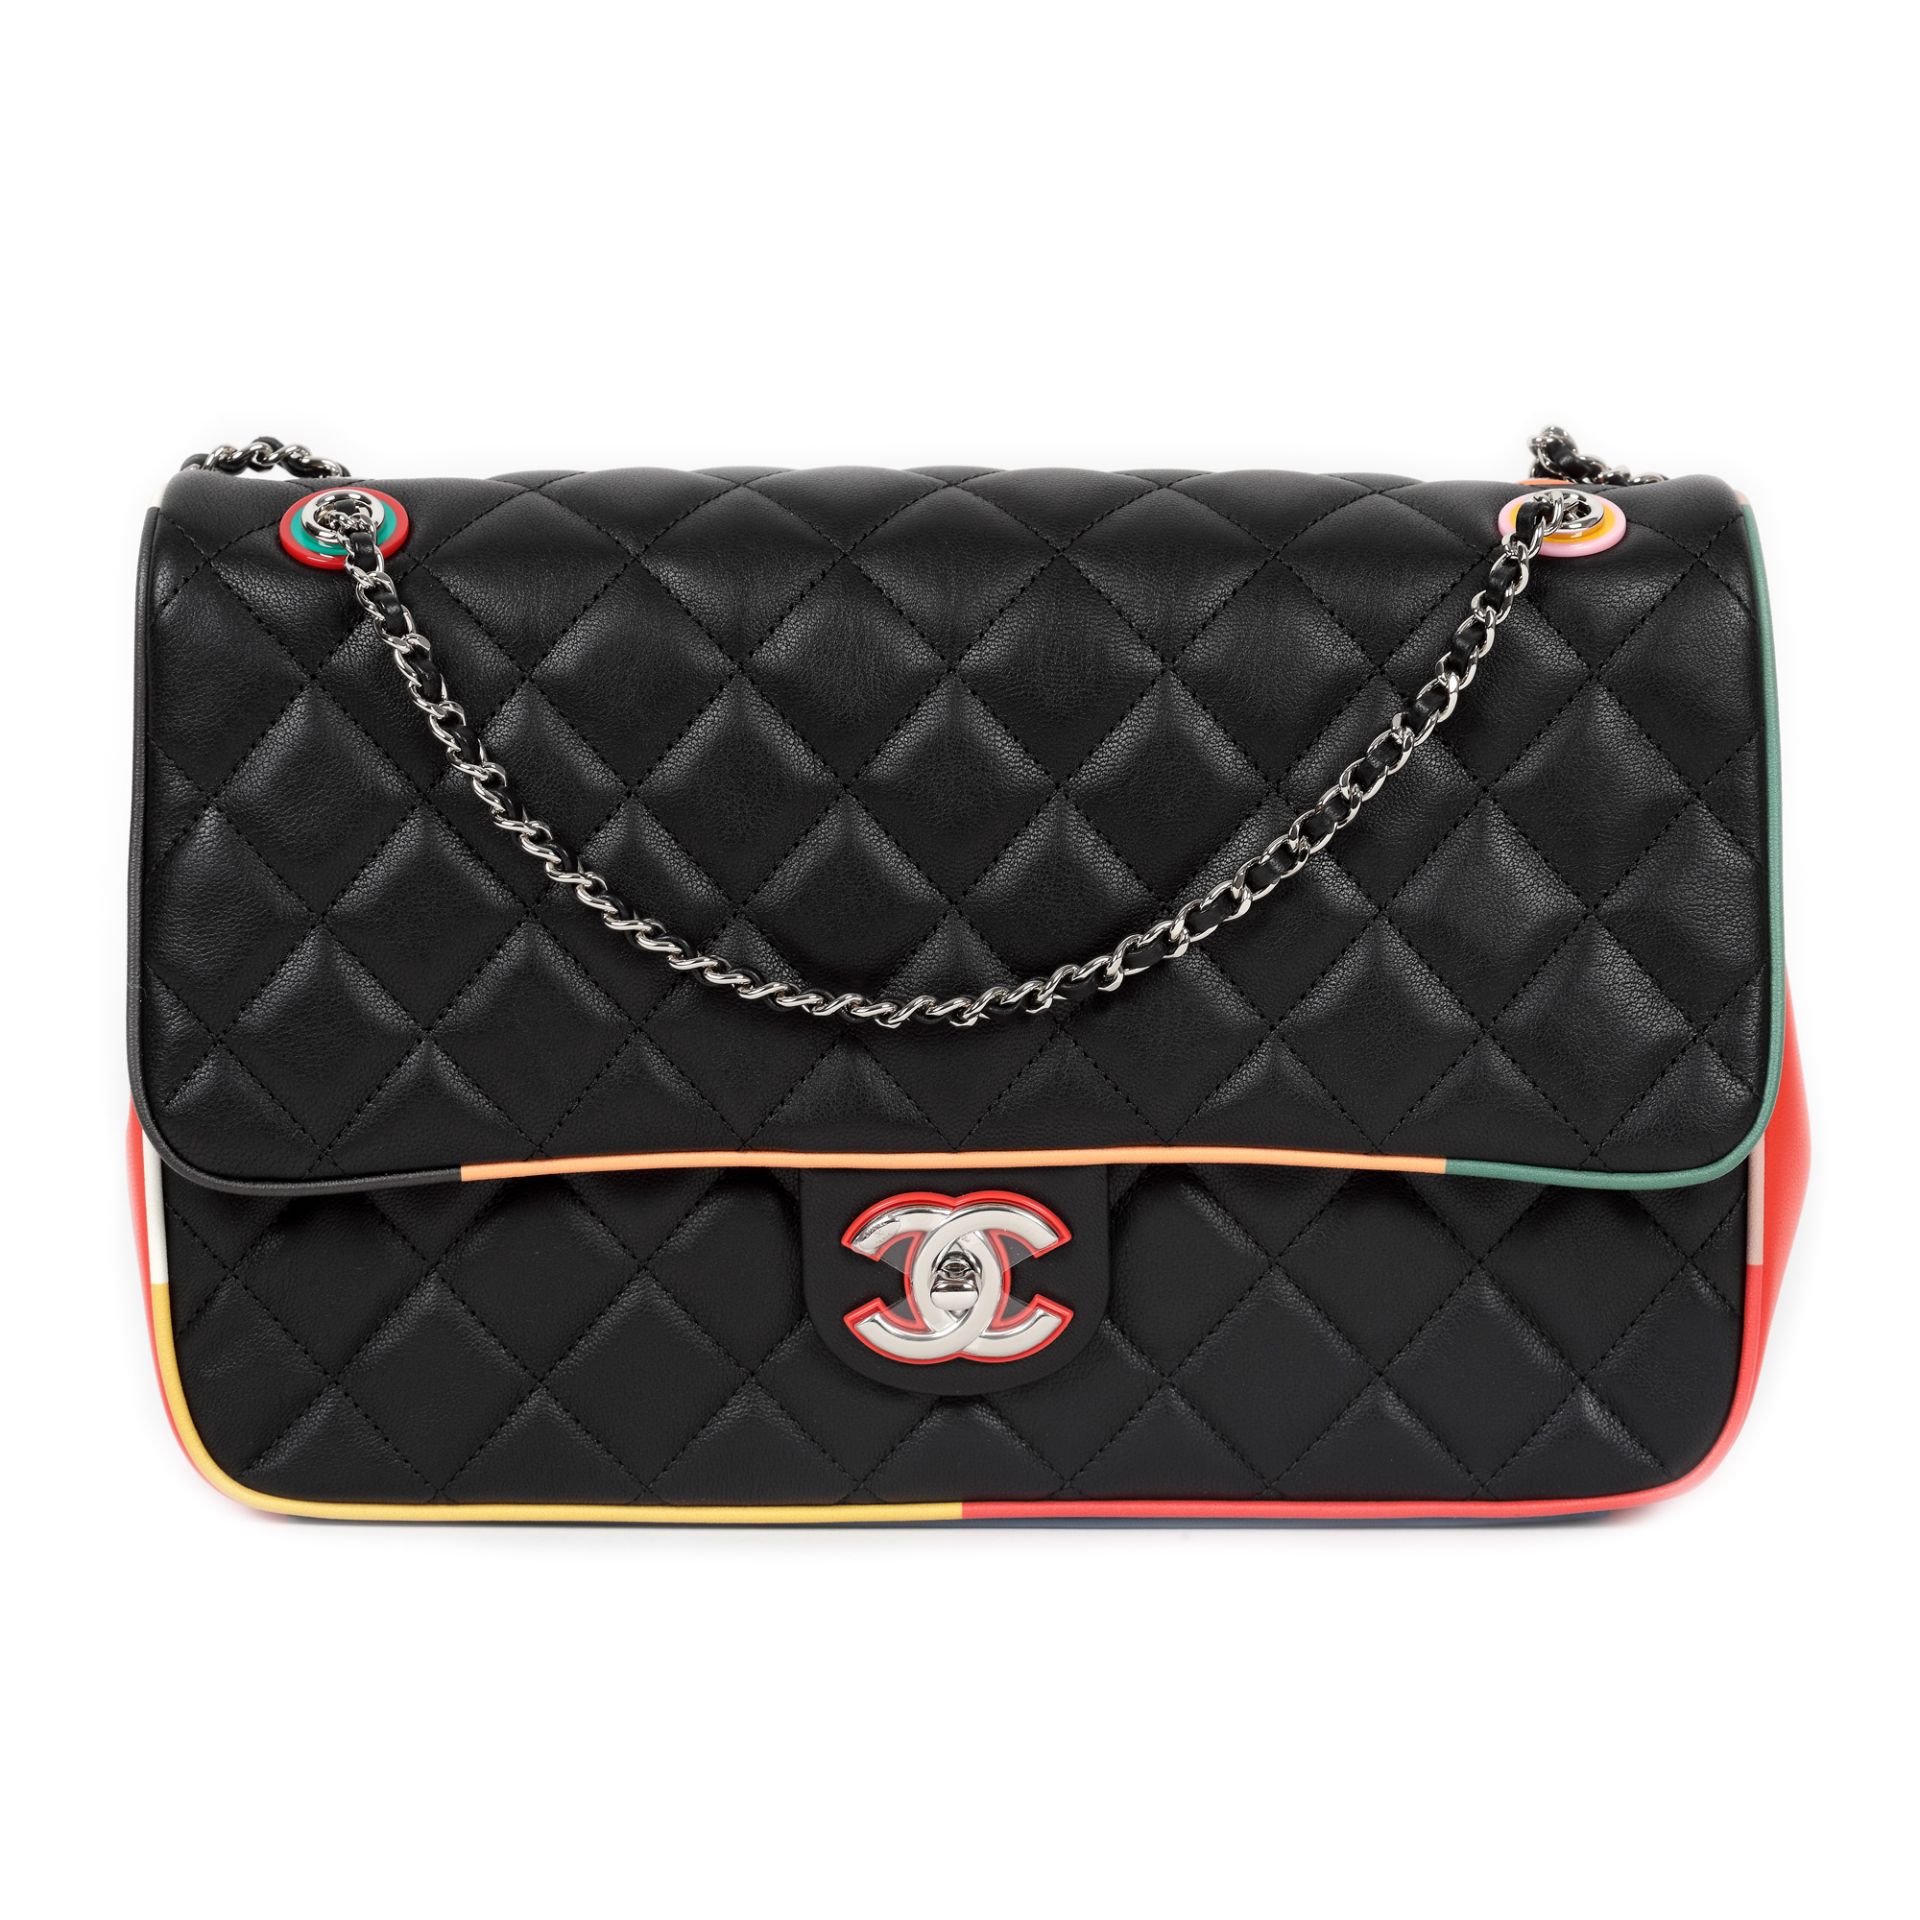 "Classic Flap Bag" - Chanel bag, quilted leather, black, with coloured resin details, authenticity c